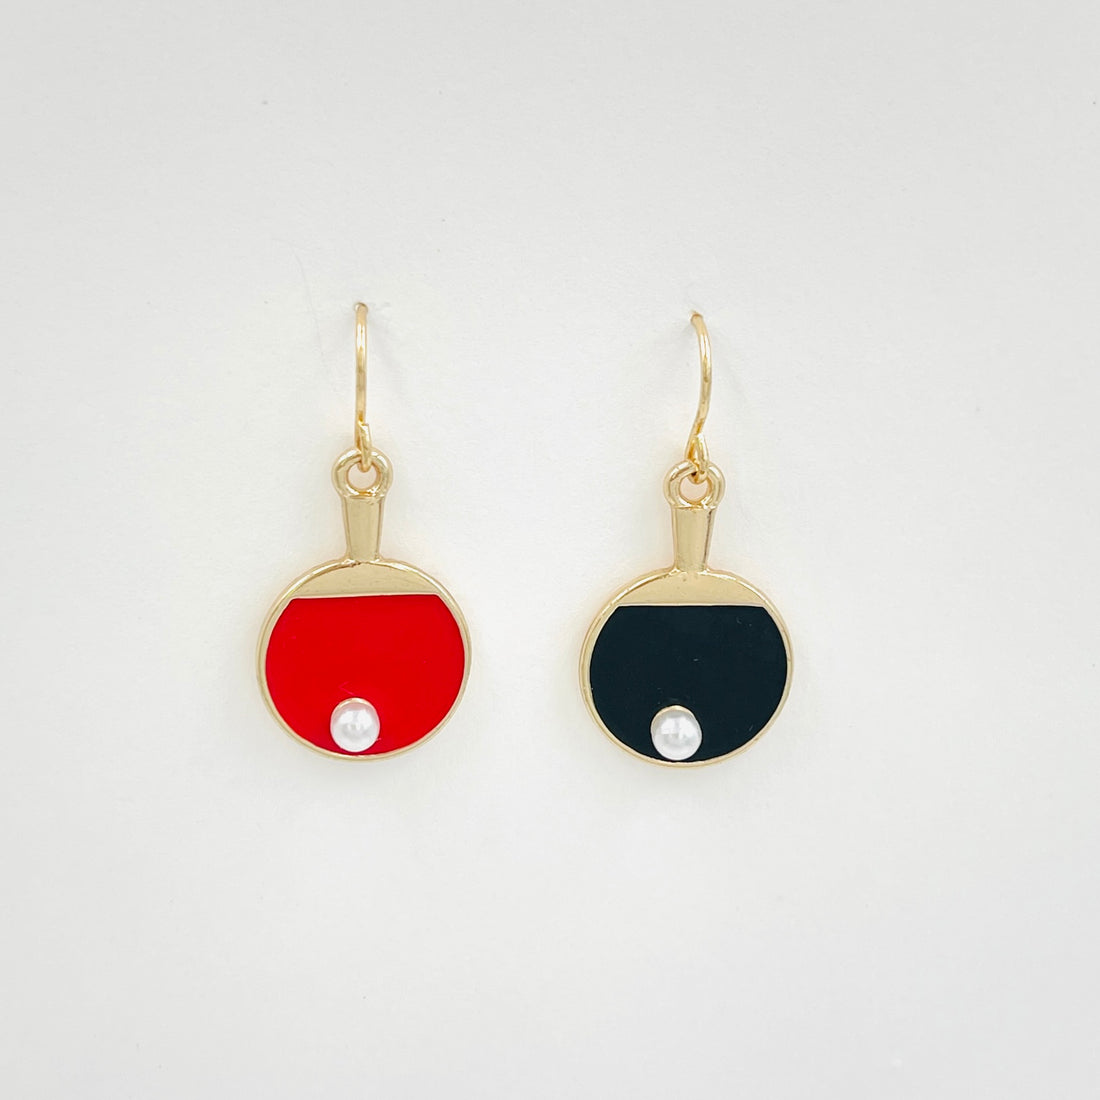 Ping Pong with mini pearl drop earrings in gold tone